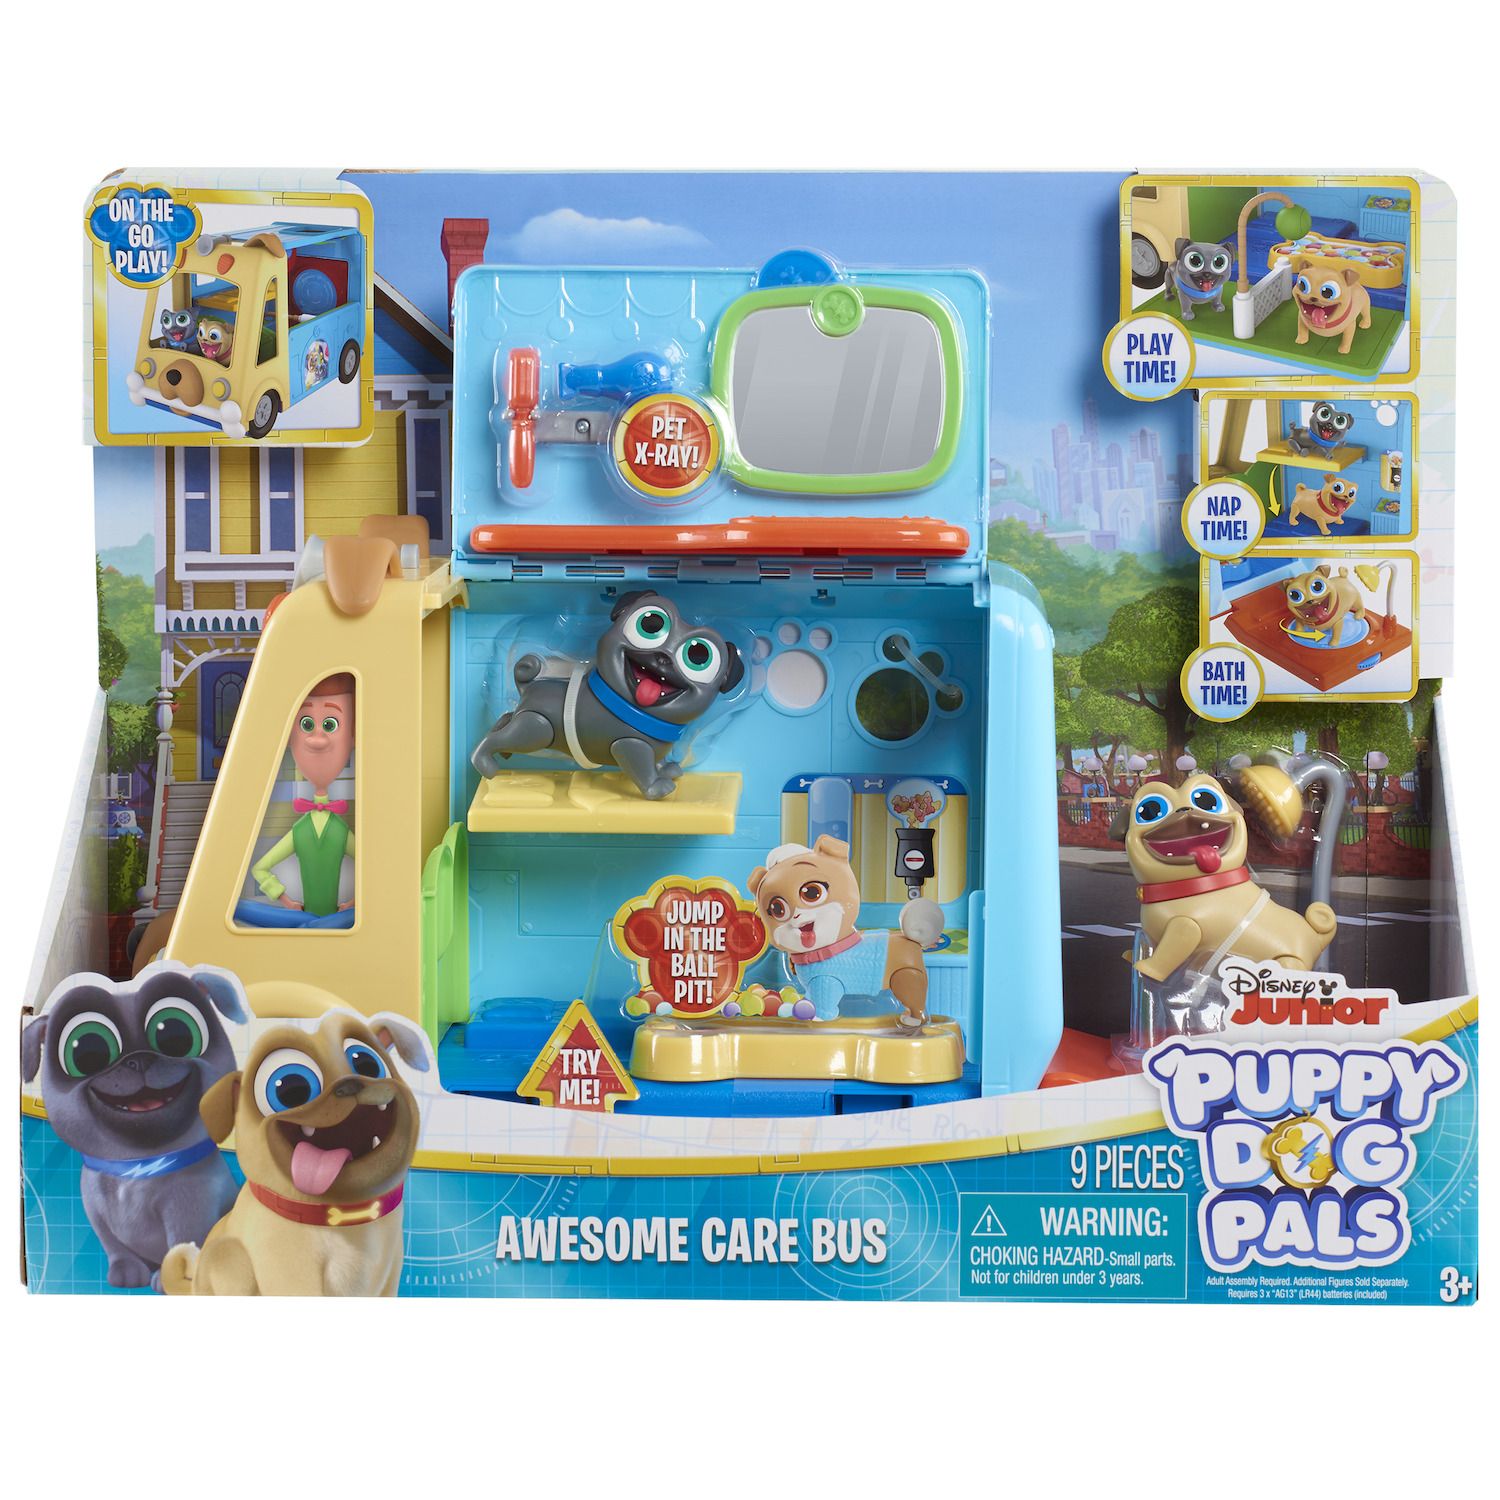 Disney's Puppy Dog Pals Awesome Care Bus